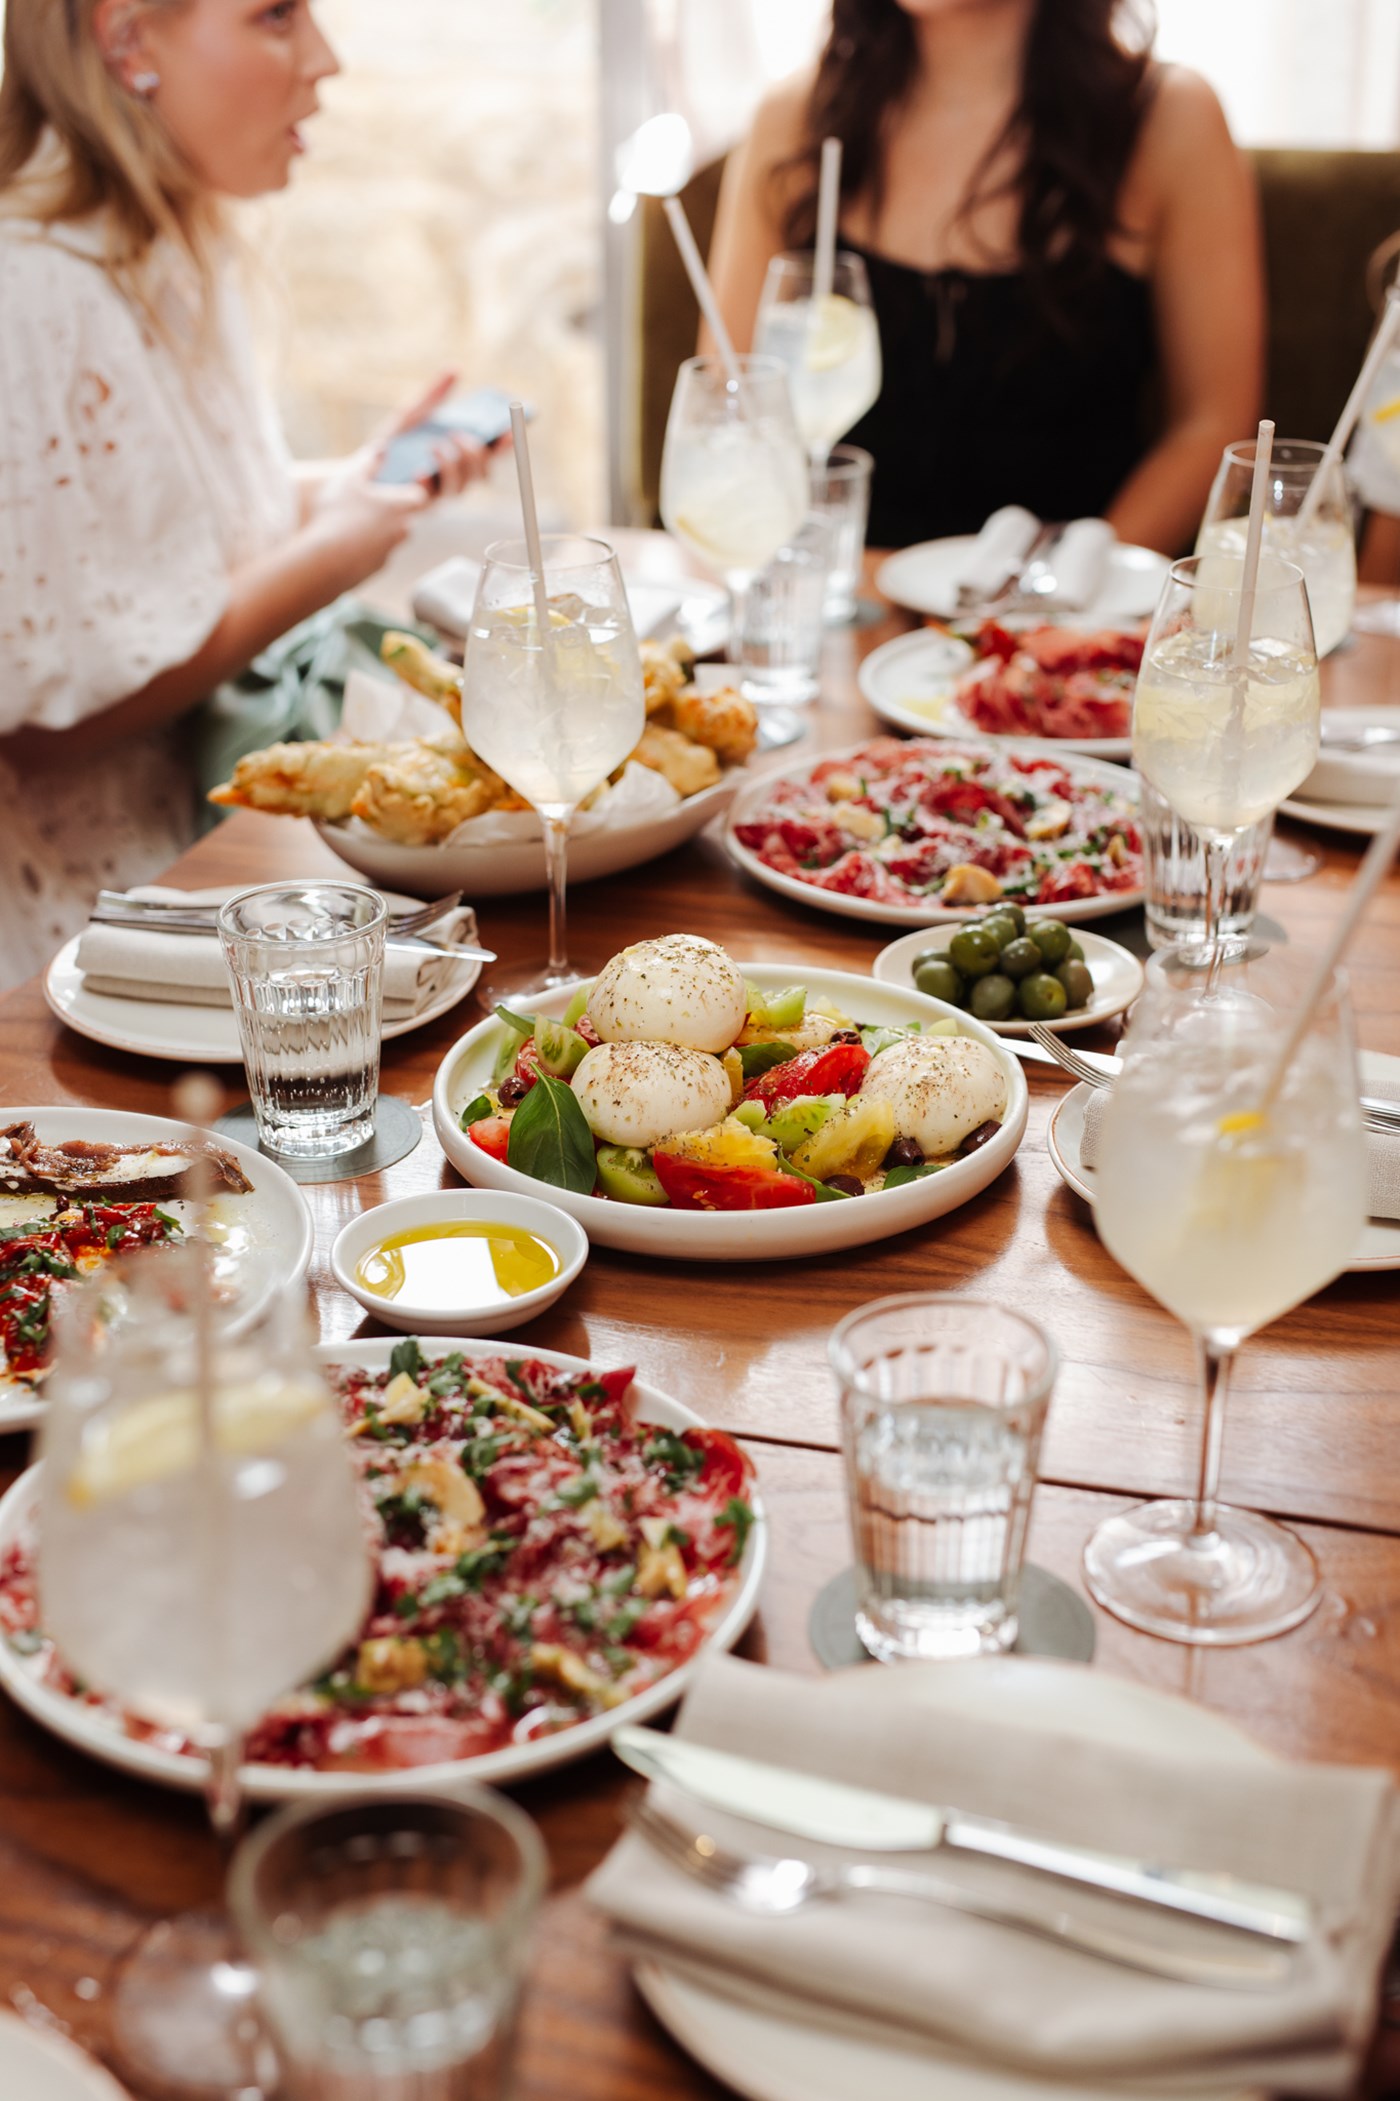 A table spread with cocktails, burrata, lives and other Italian dishes 